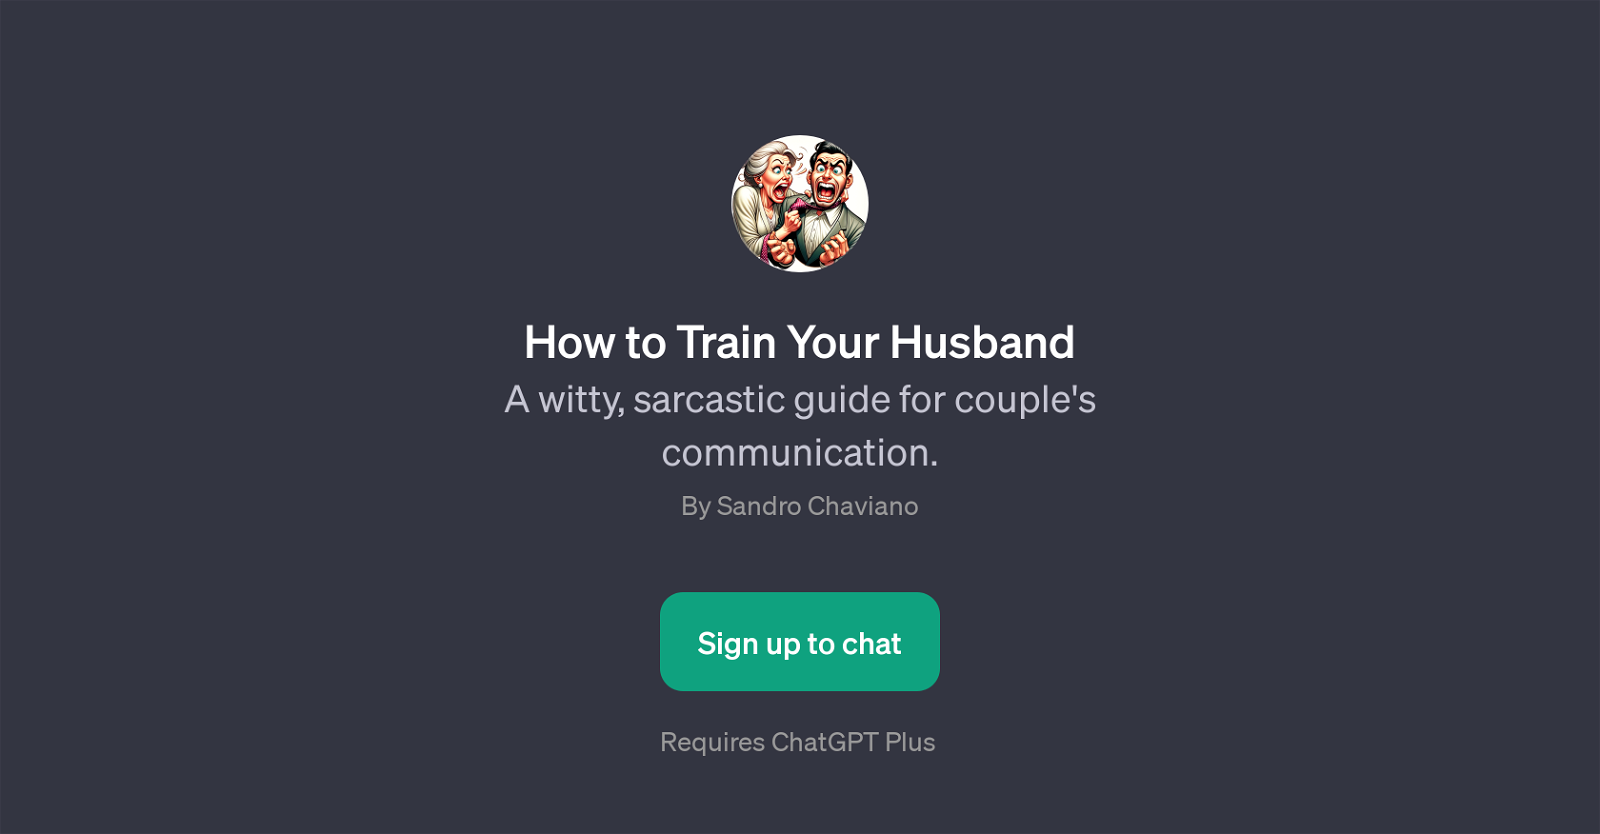 How to Train Your Husband website